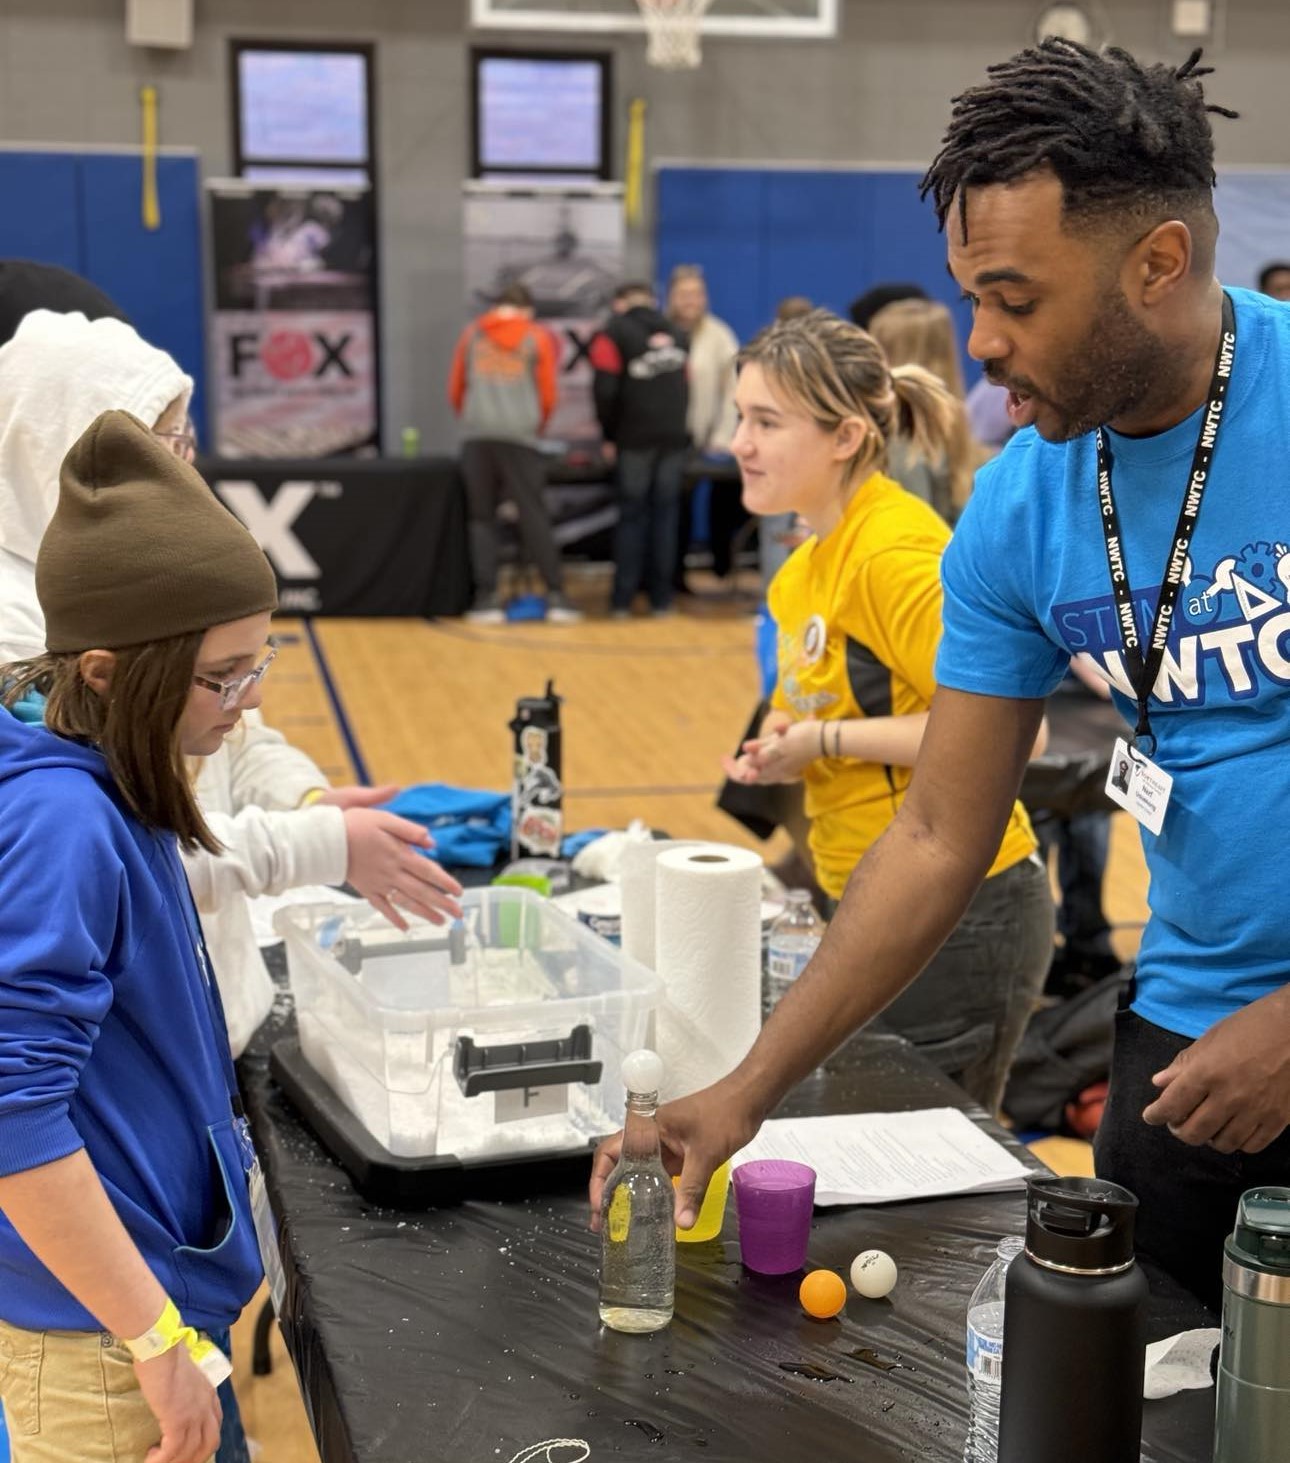 Inspiring the next generation of STEM innovators through experiential learning